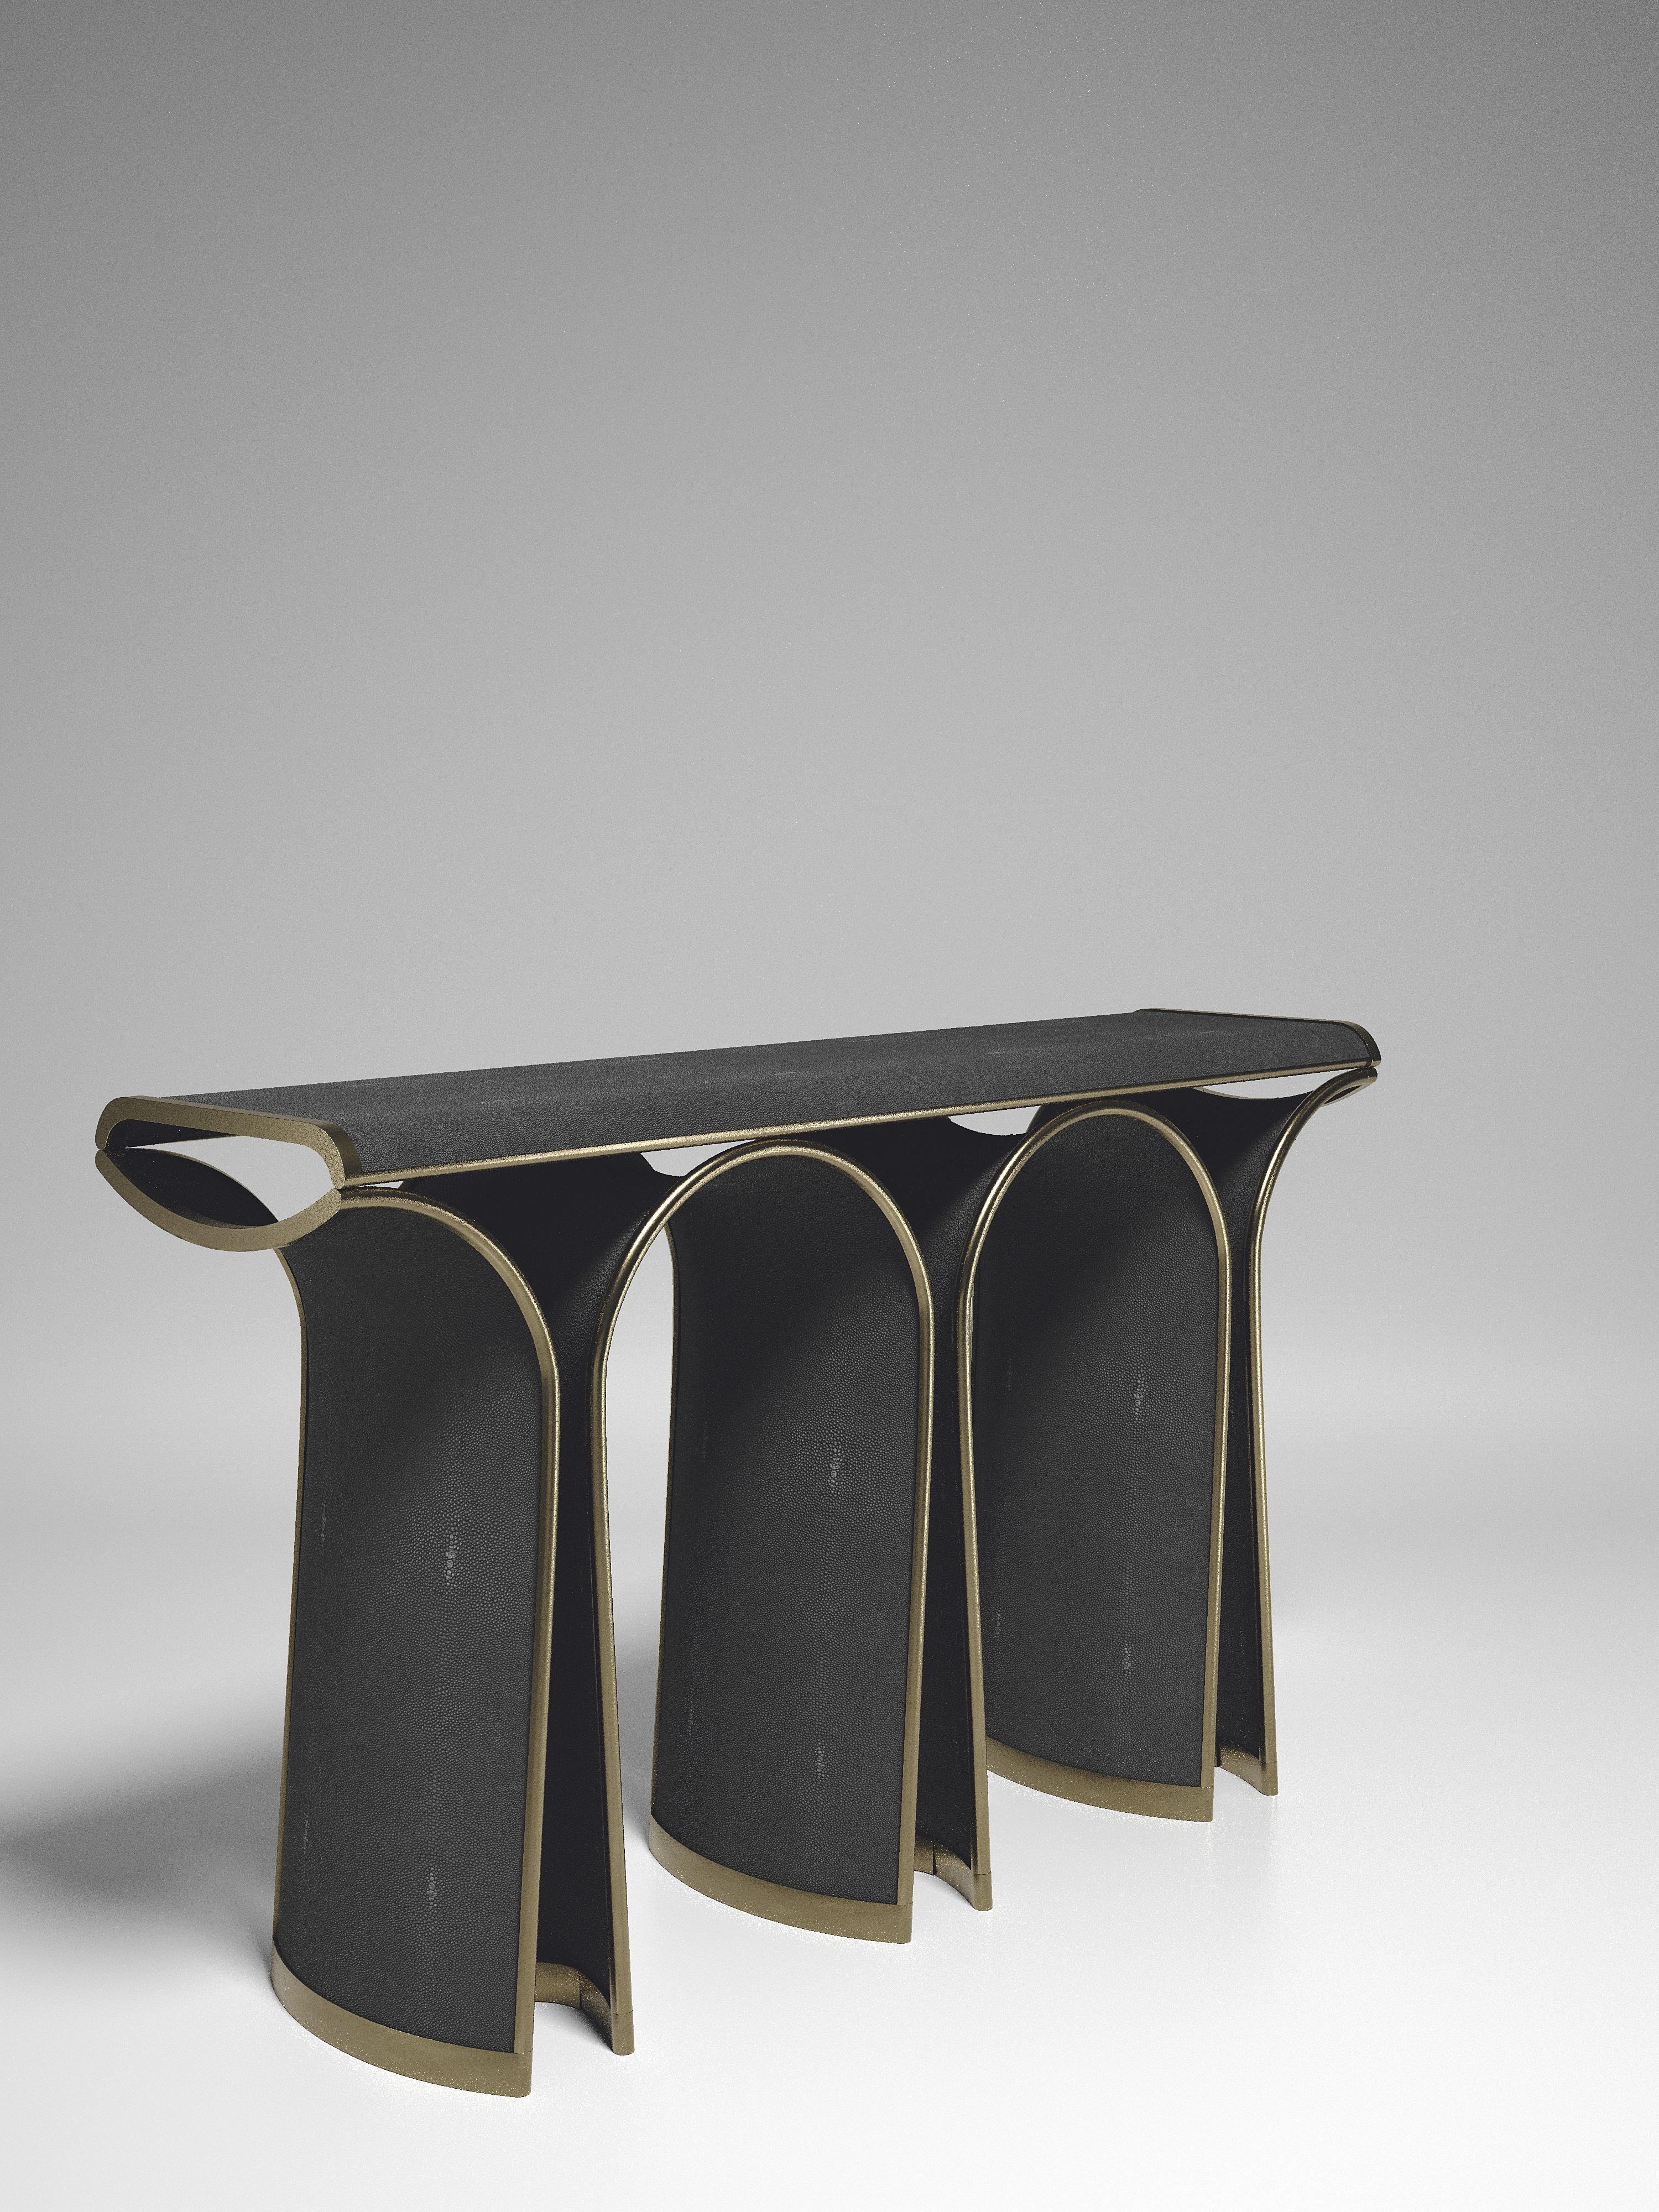 The Nymphea console by R&Y Augousti in black shagreen with bronze-patina brass details explores the brand's iconic DNA of bringing old world artisanal craft into a contemporary and utterly luxury feel. Available in other finishes. Custom